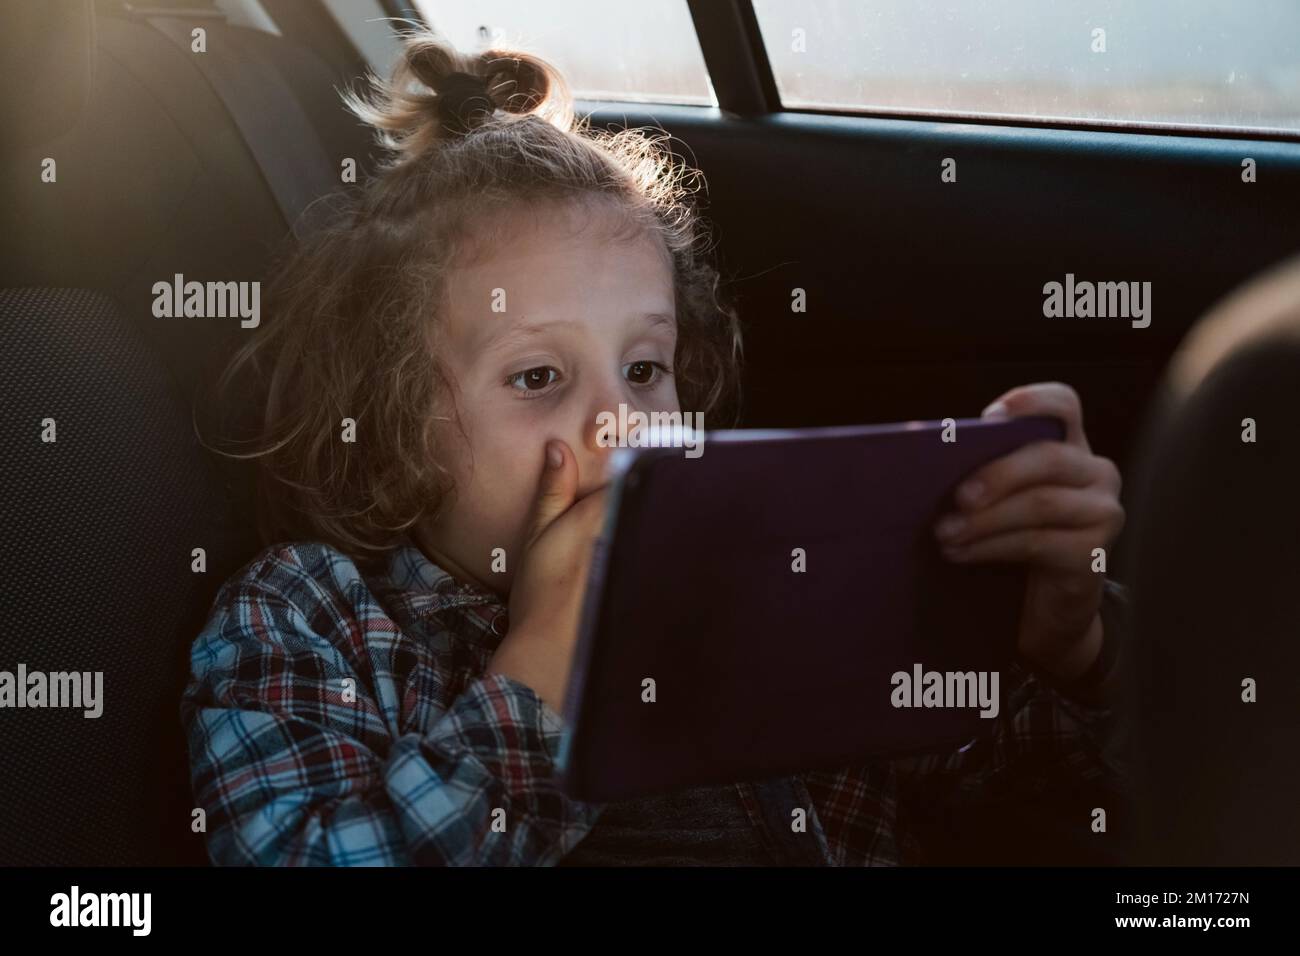 Screaming boy watching movie on computer tablet in car. Child using technology.  Stock Photo